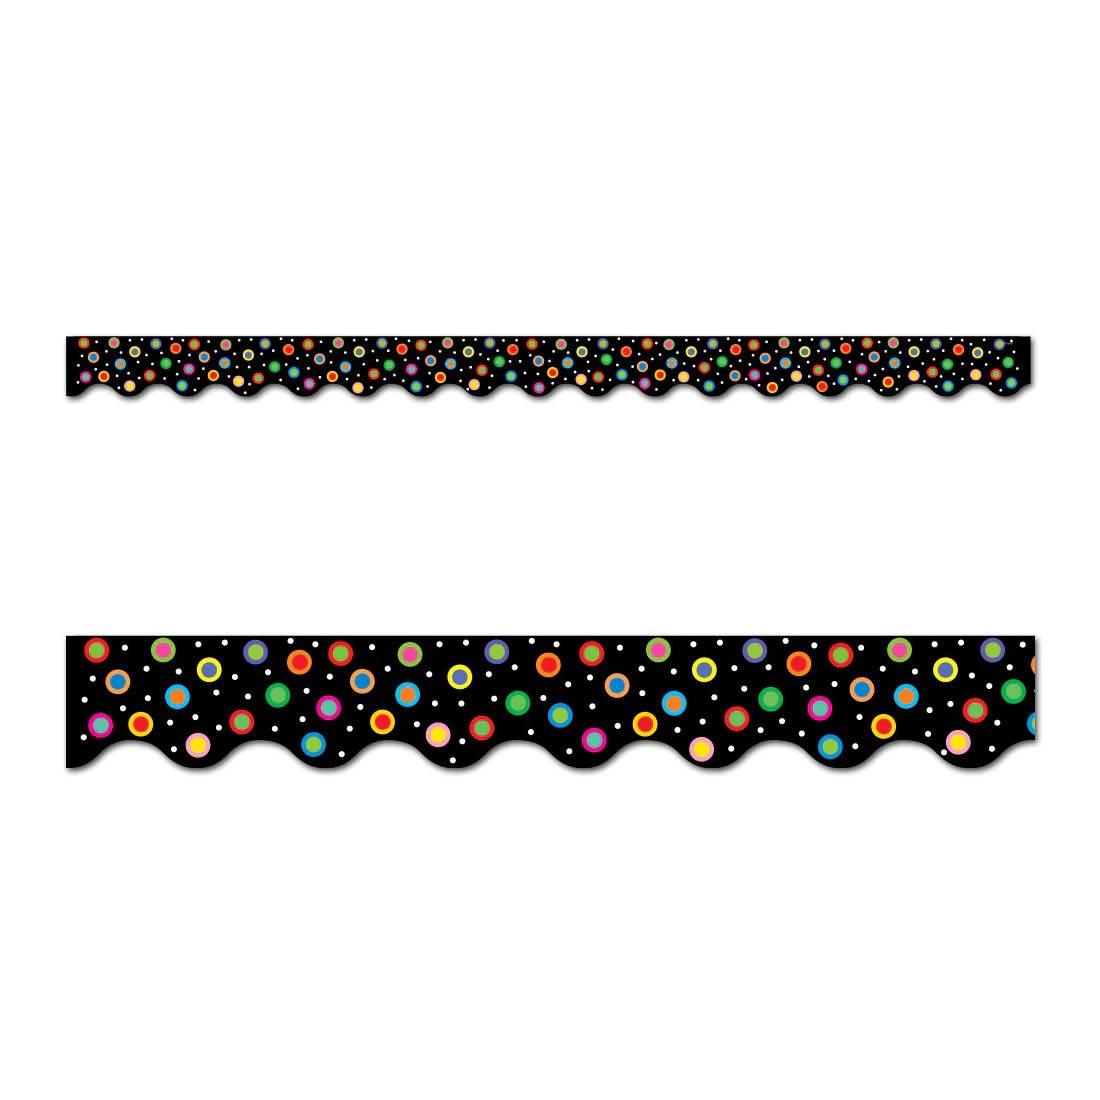 Dots On Black Wavy EZ Border has multicolored dots on a black background